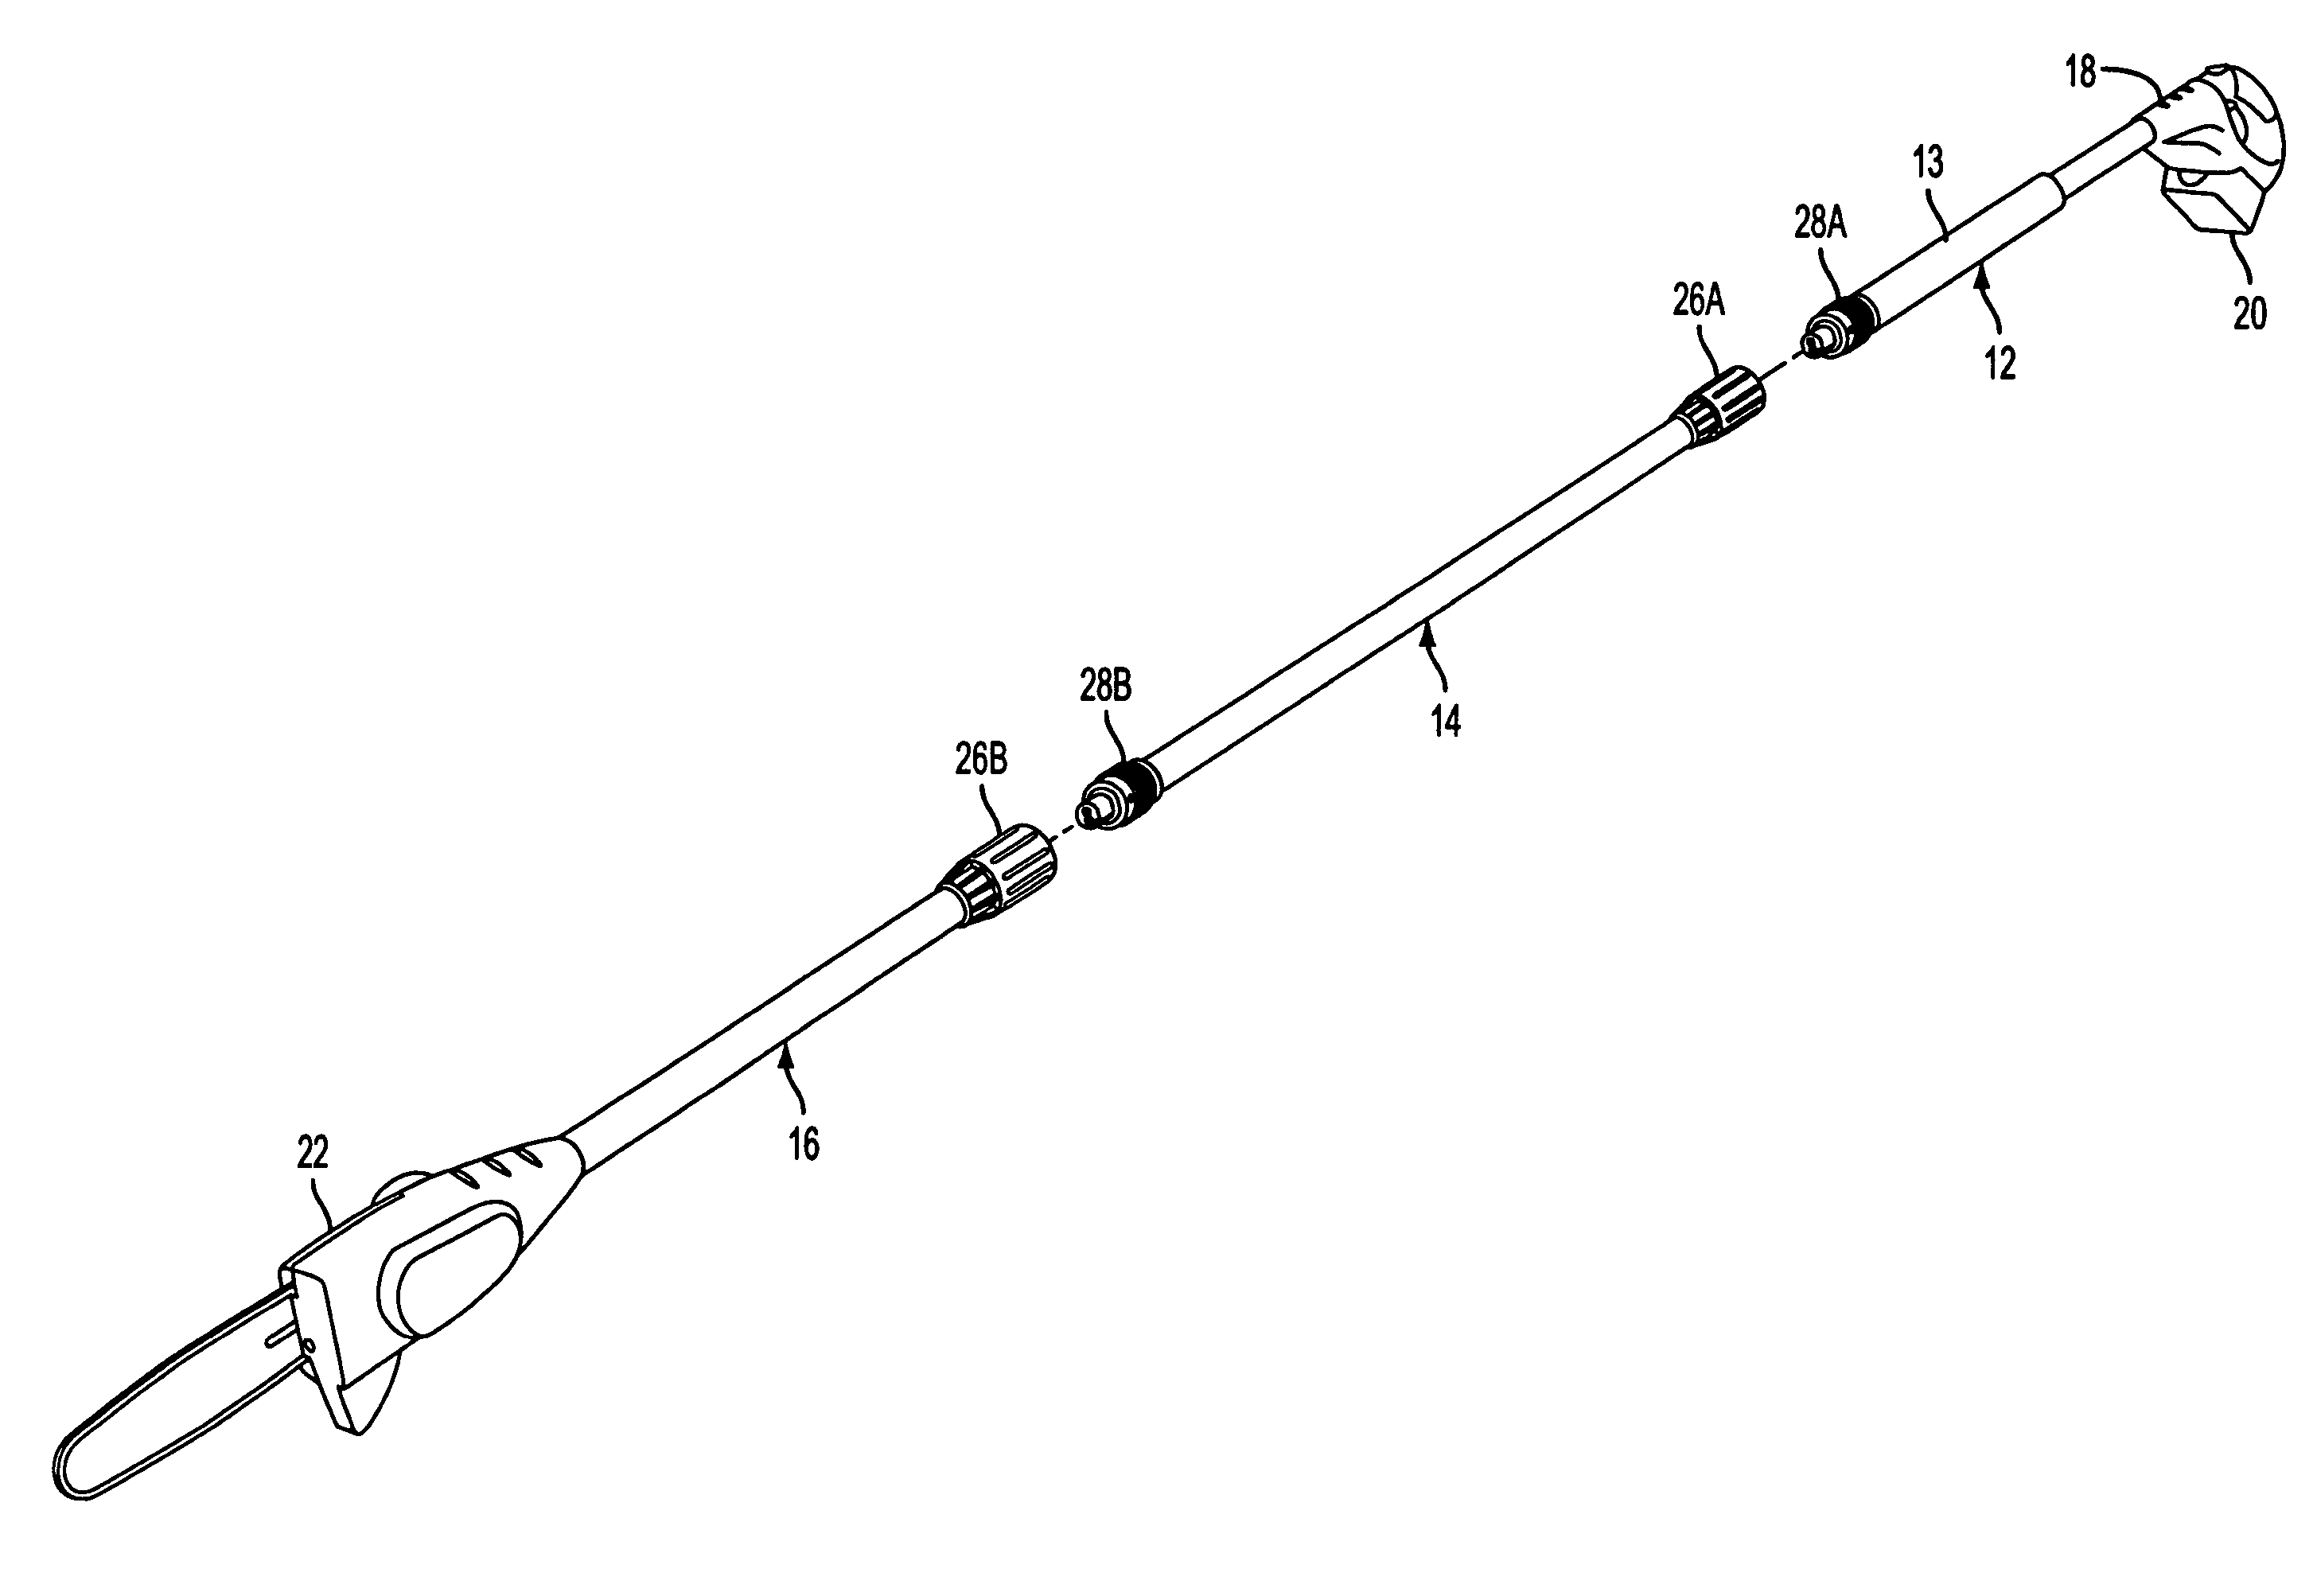 Extensible pole saw having separable sections